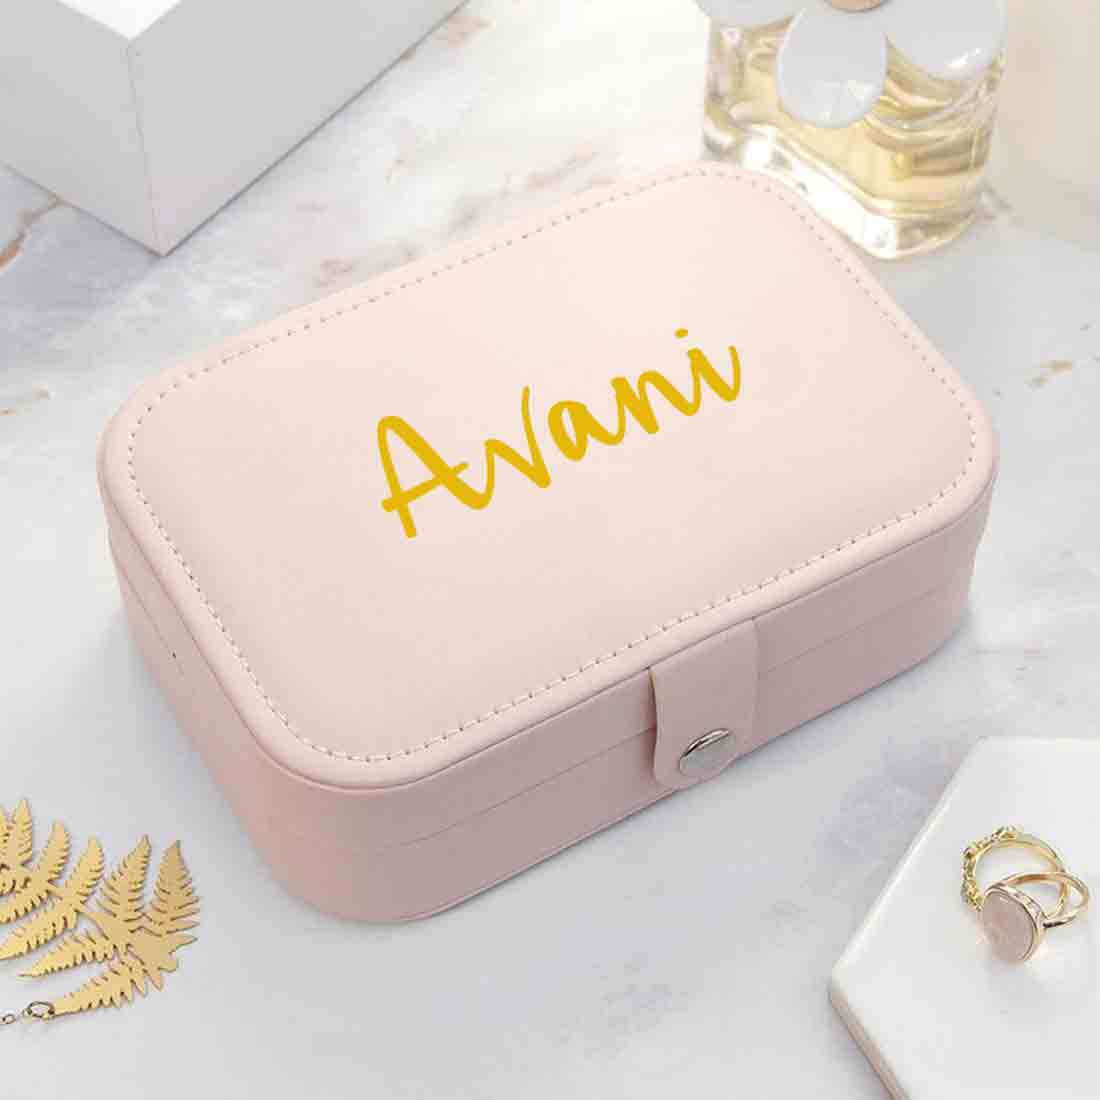 Personalised Gift Box Hamper For Women Comes with Passport Cover Photos Art and Pink Jewellery Box